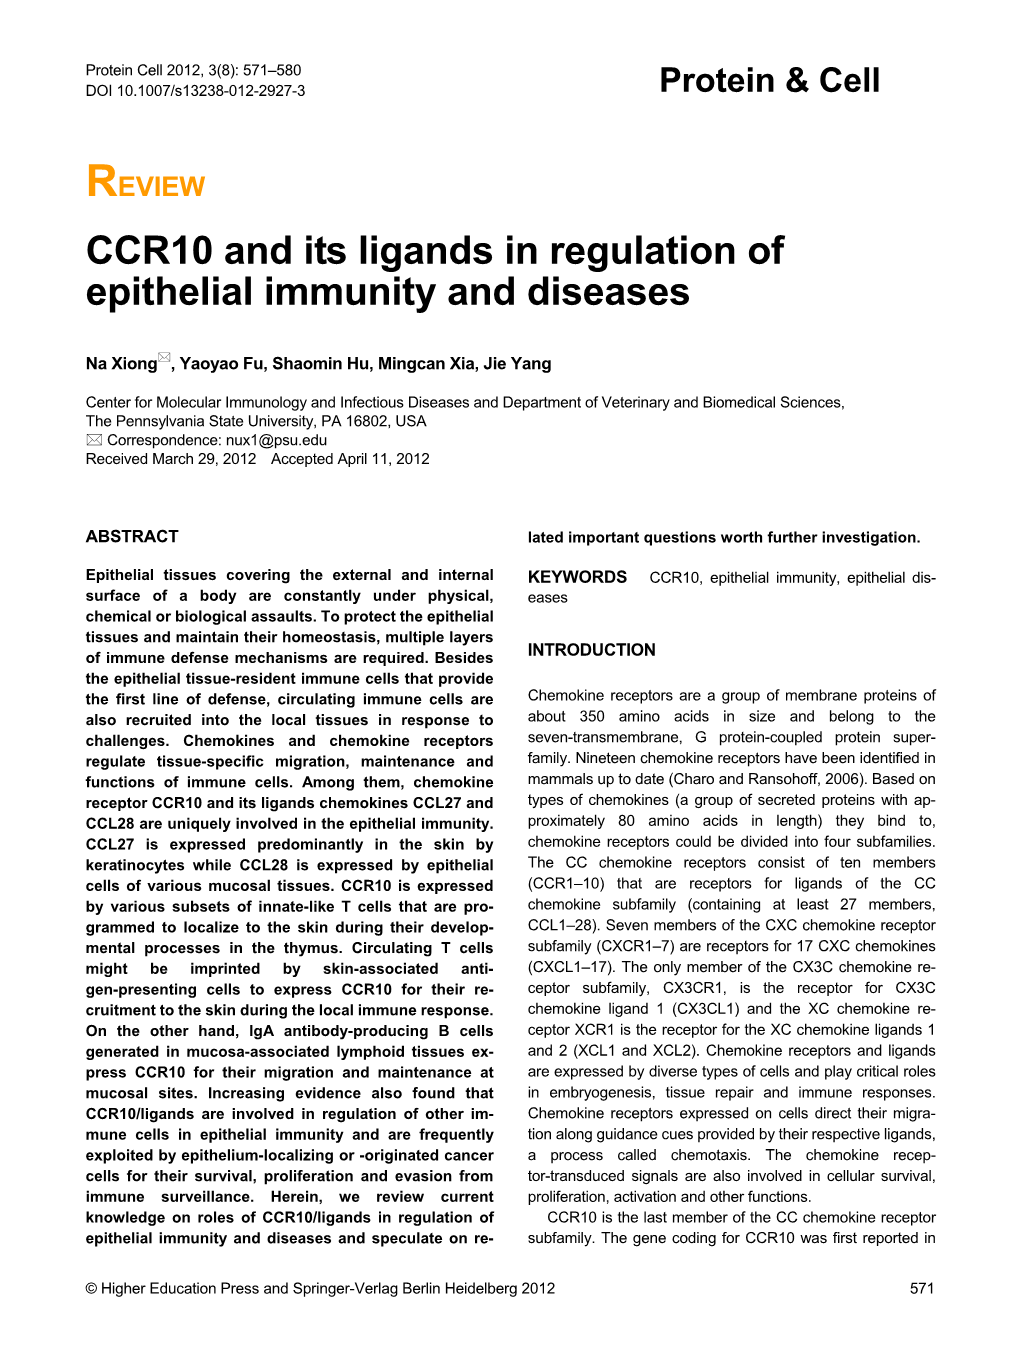 CCR10 and Its Ligands in Regulation of Epithelial Immunity and Diseases